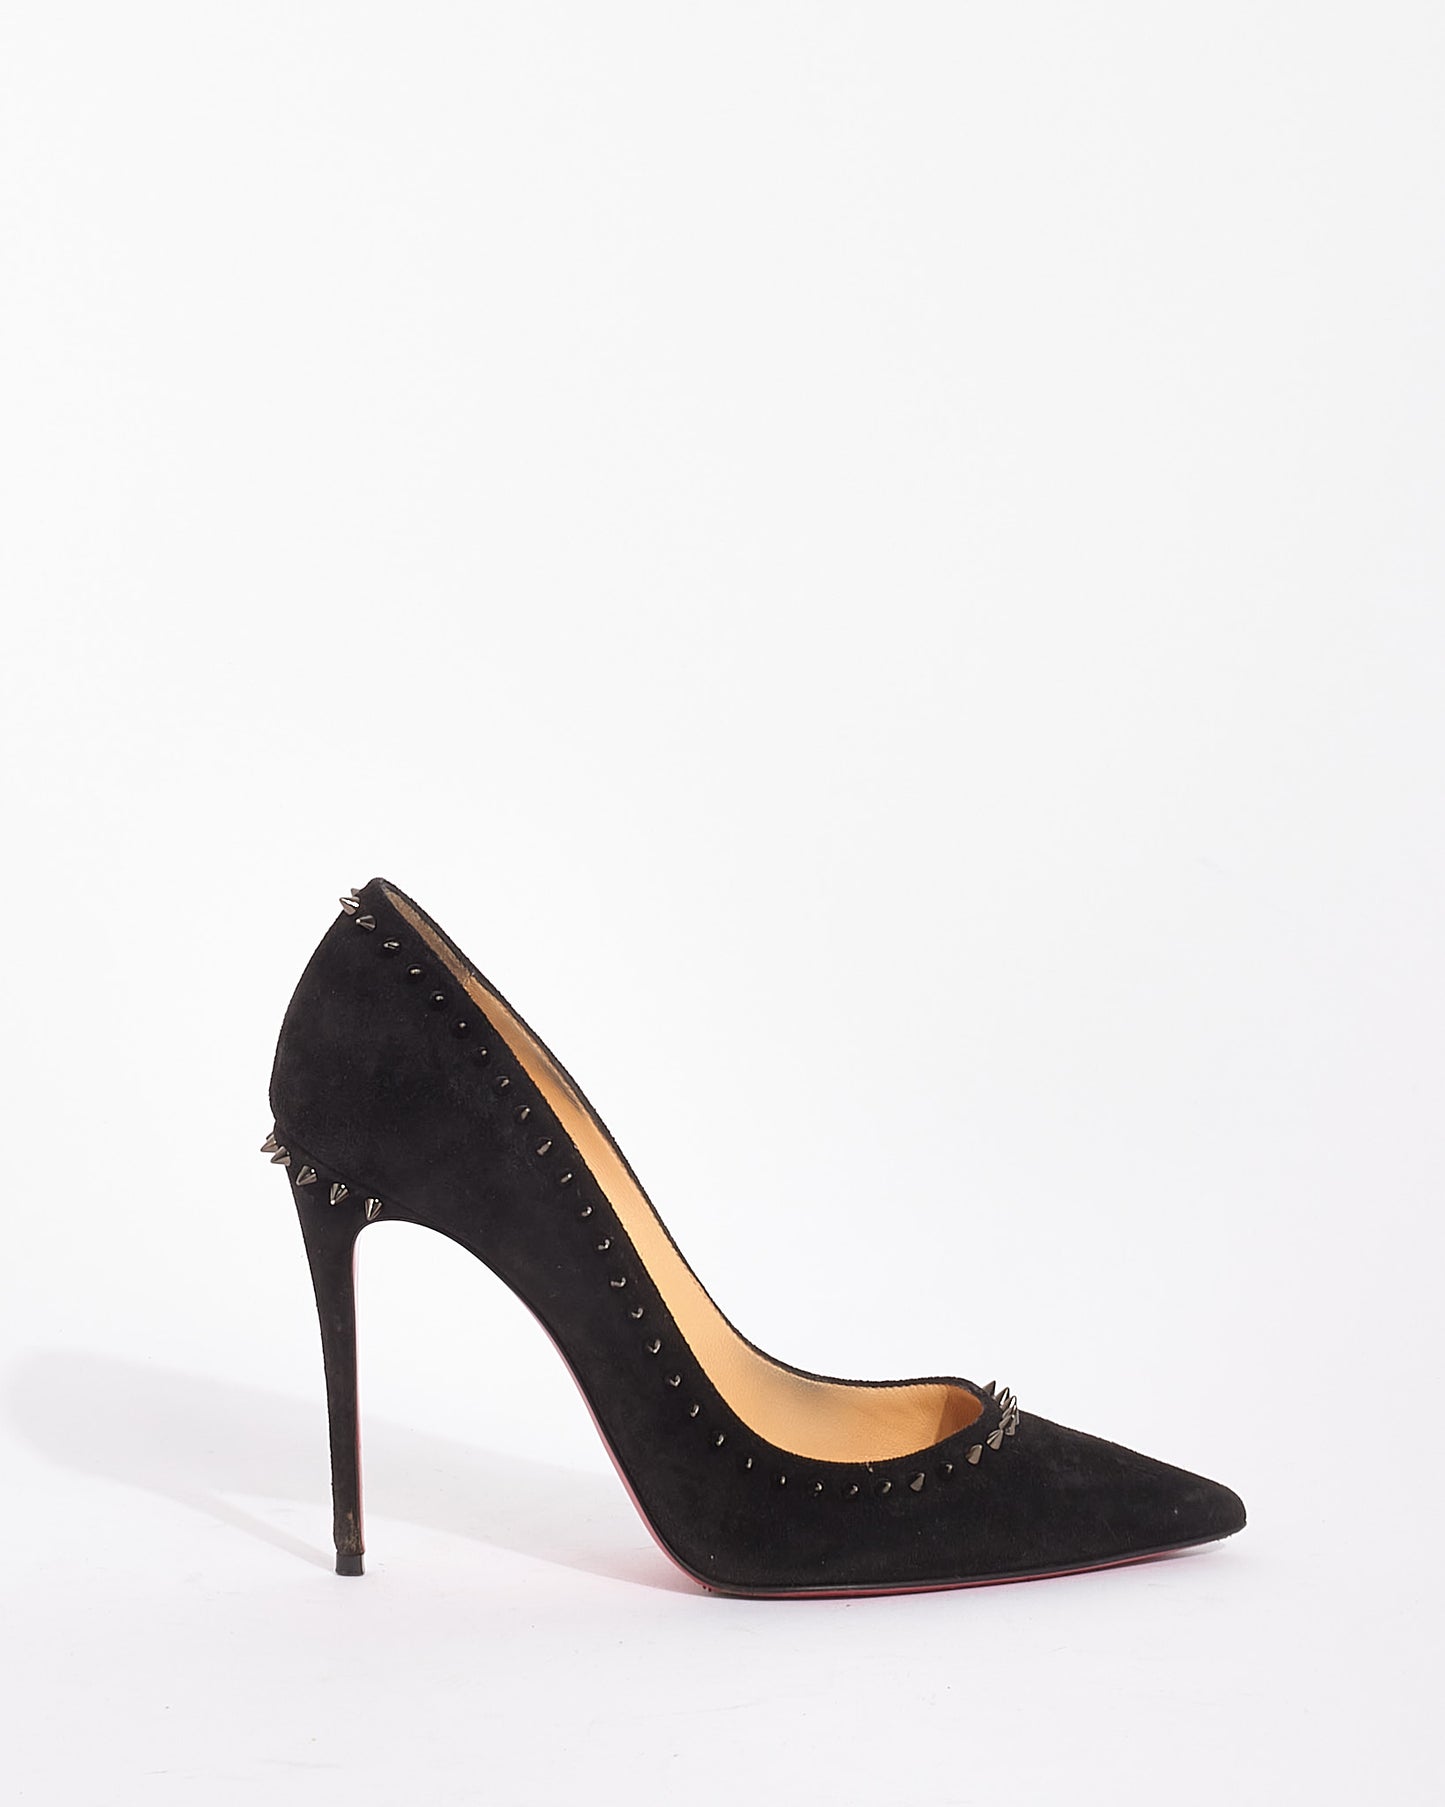 Christian Louboutin Black Suede with Spikes Anjalina 100 Pumps - 36